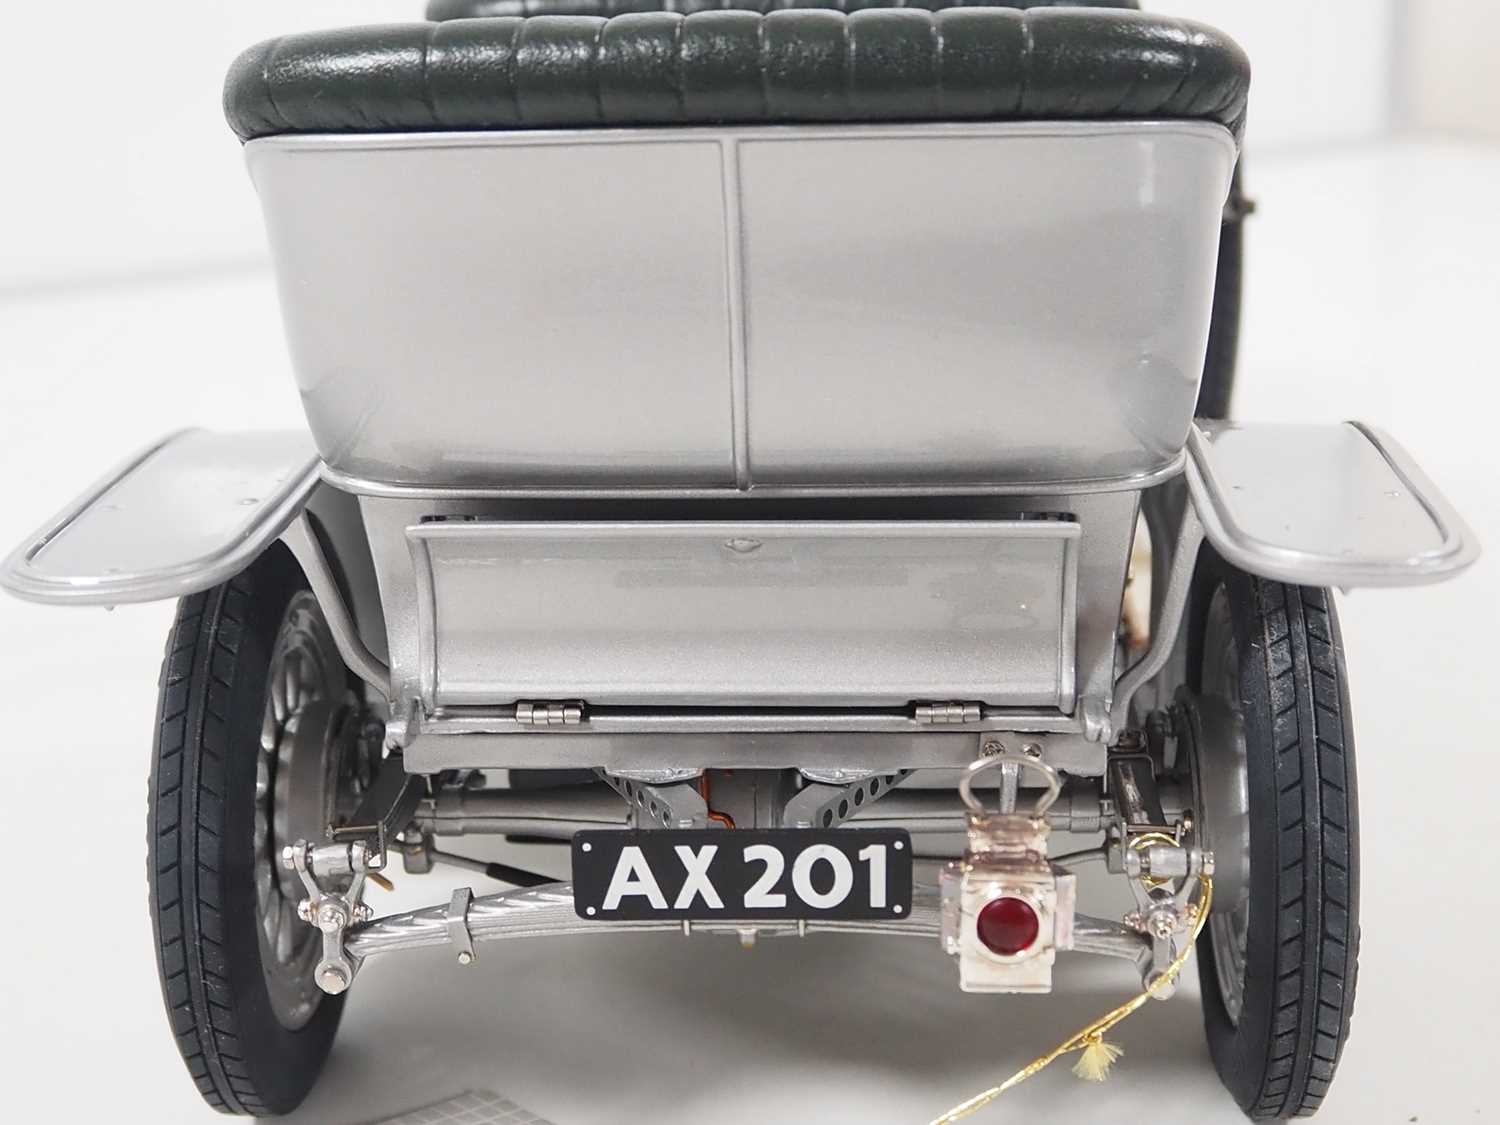 A FRANKLIN MINT 1:12 scale diecast 1907 Rolls Royce Silver Ghost - appears undisplayed in original - Image 7 of 8